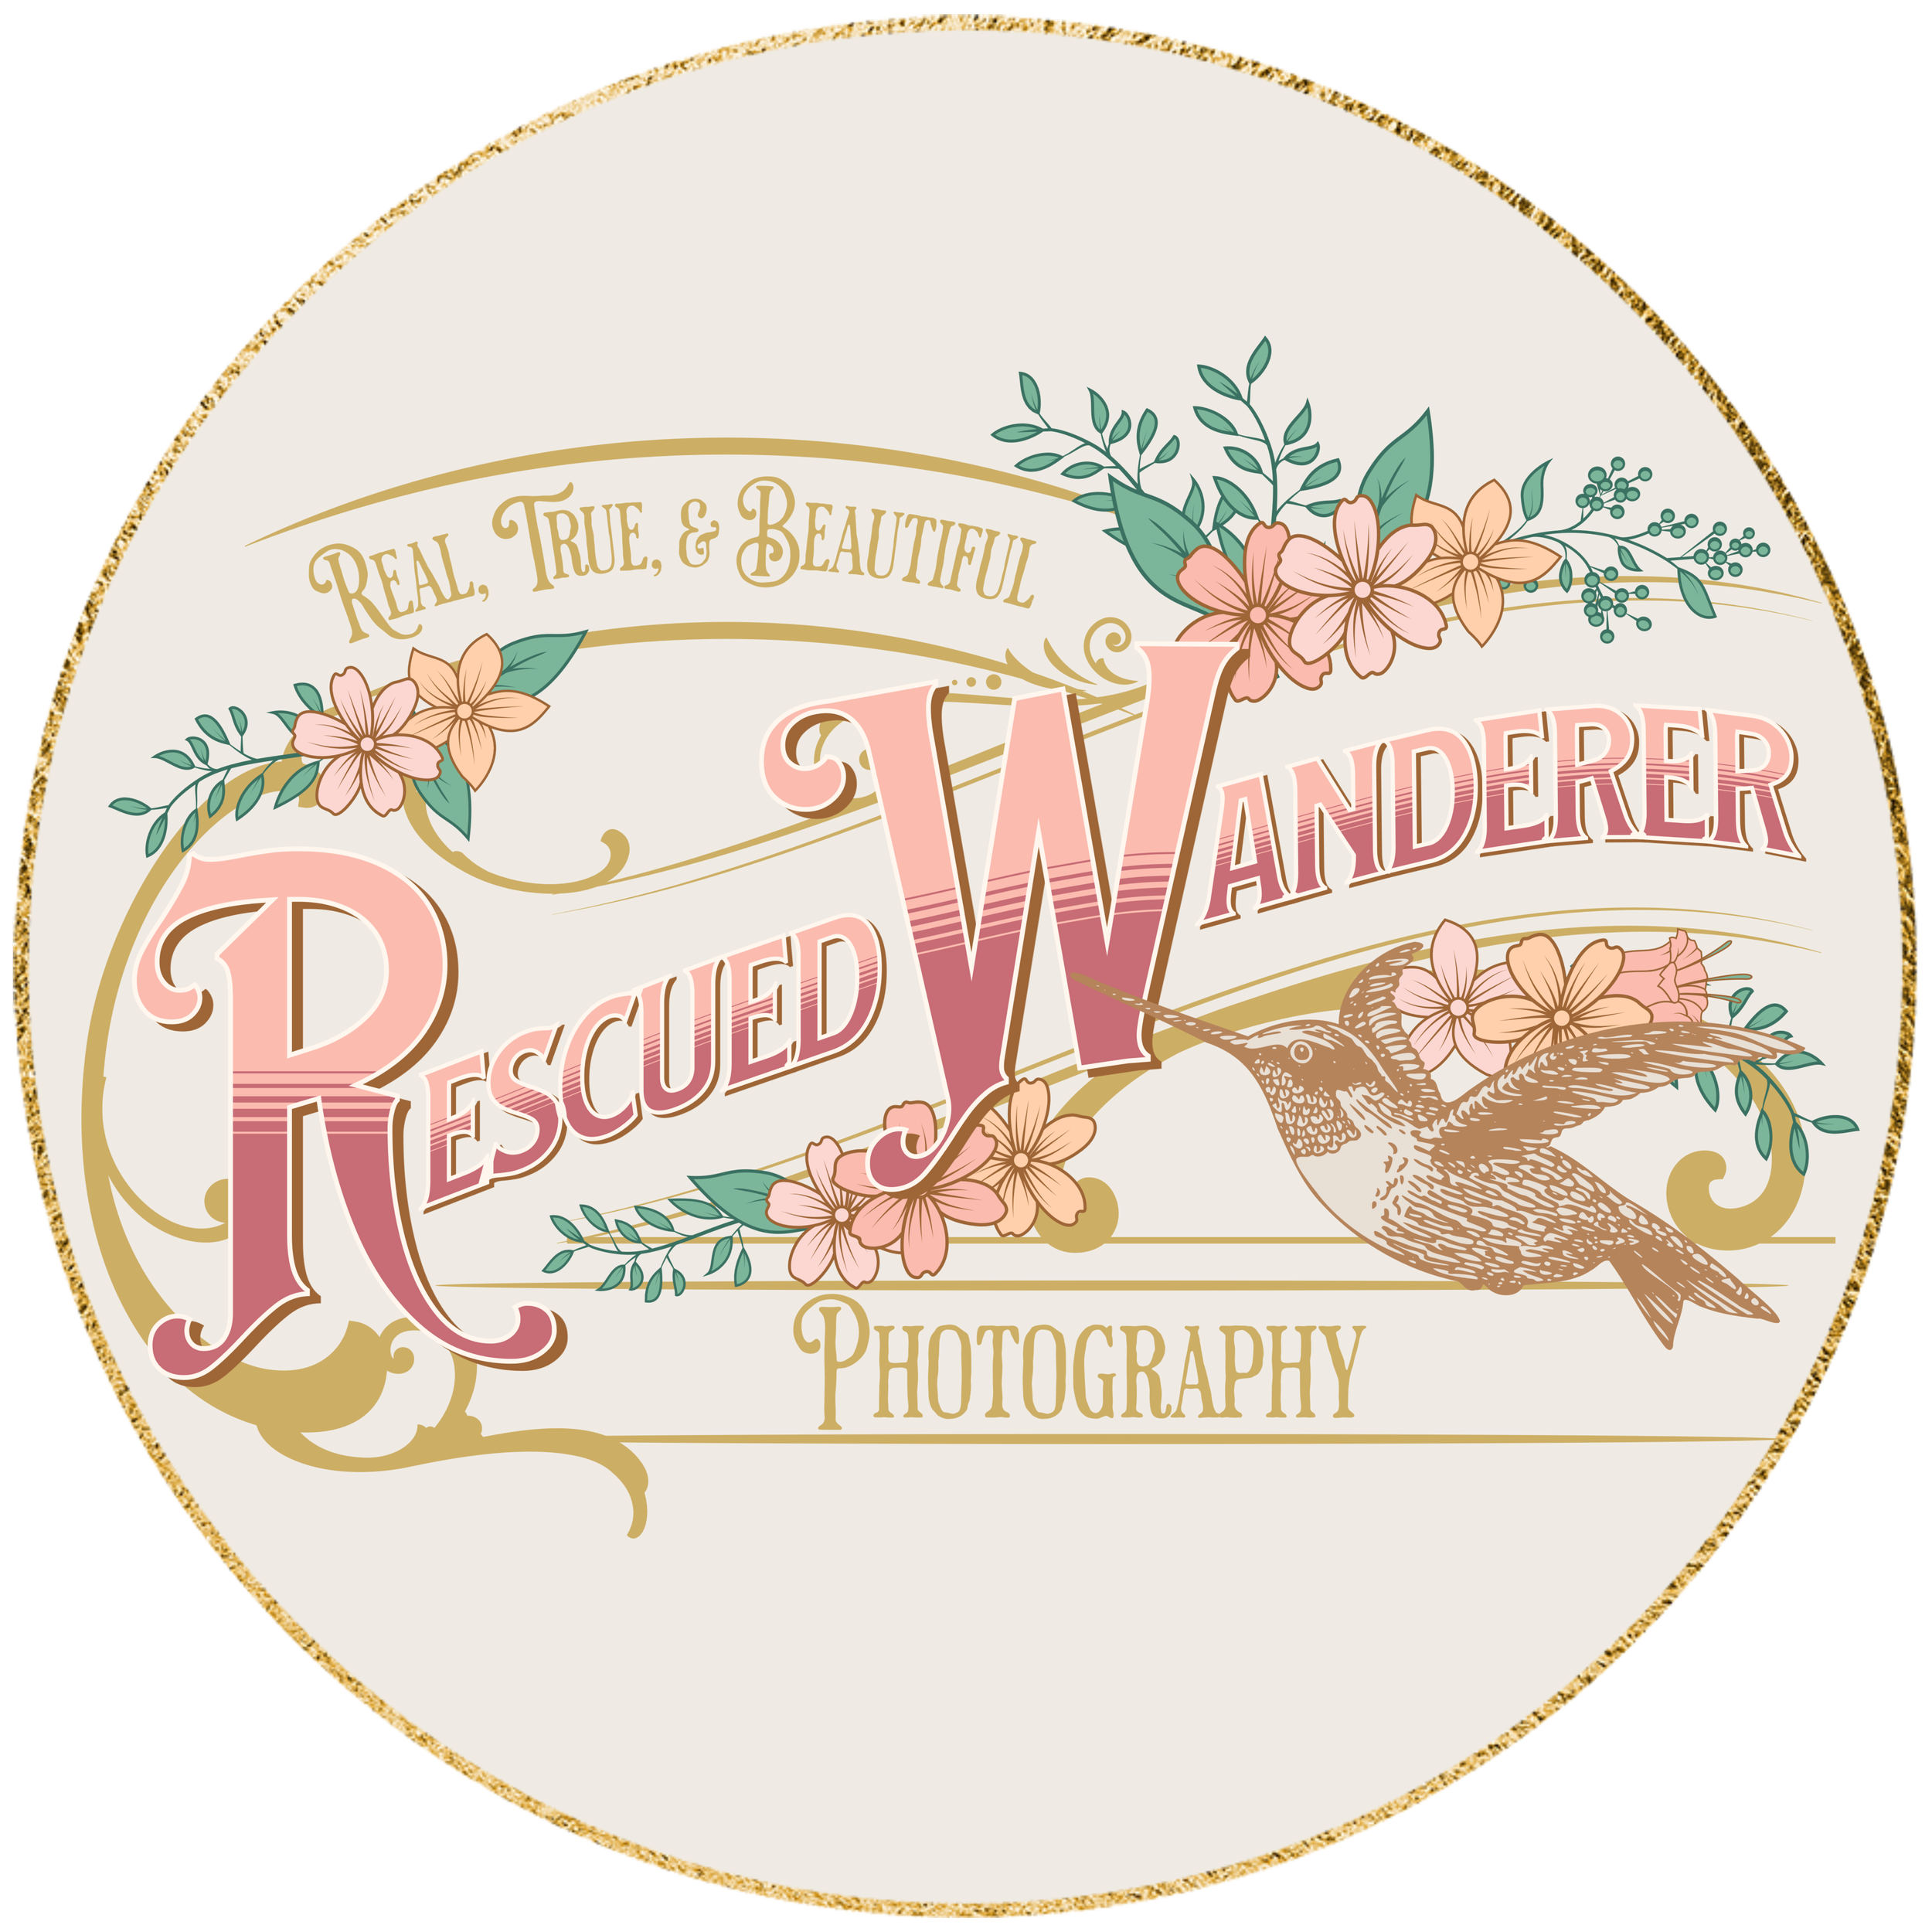 RESCUED WANDERER PHOTOGRAPHY